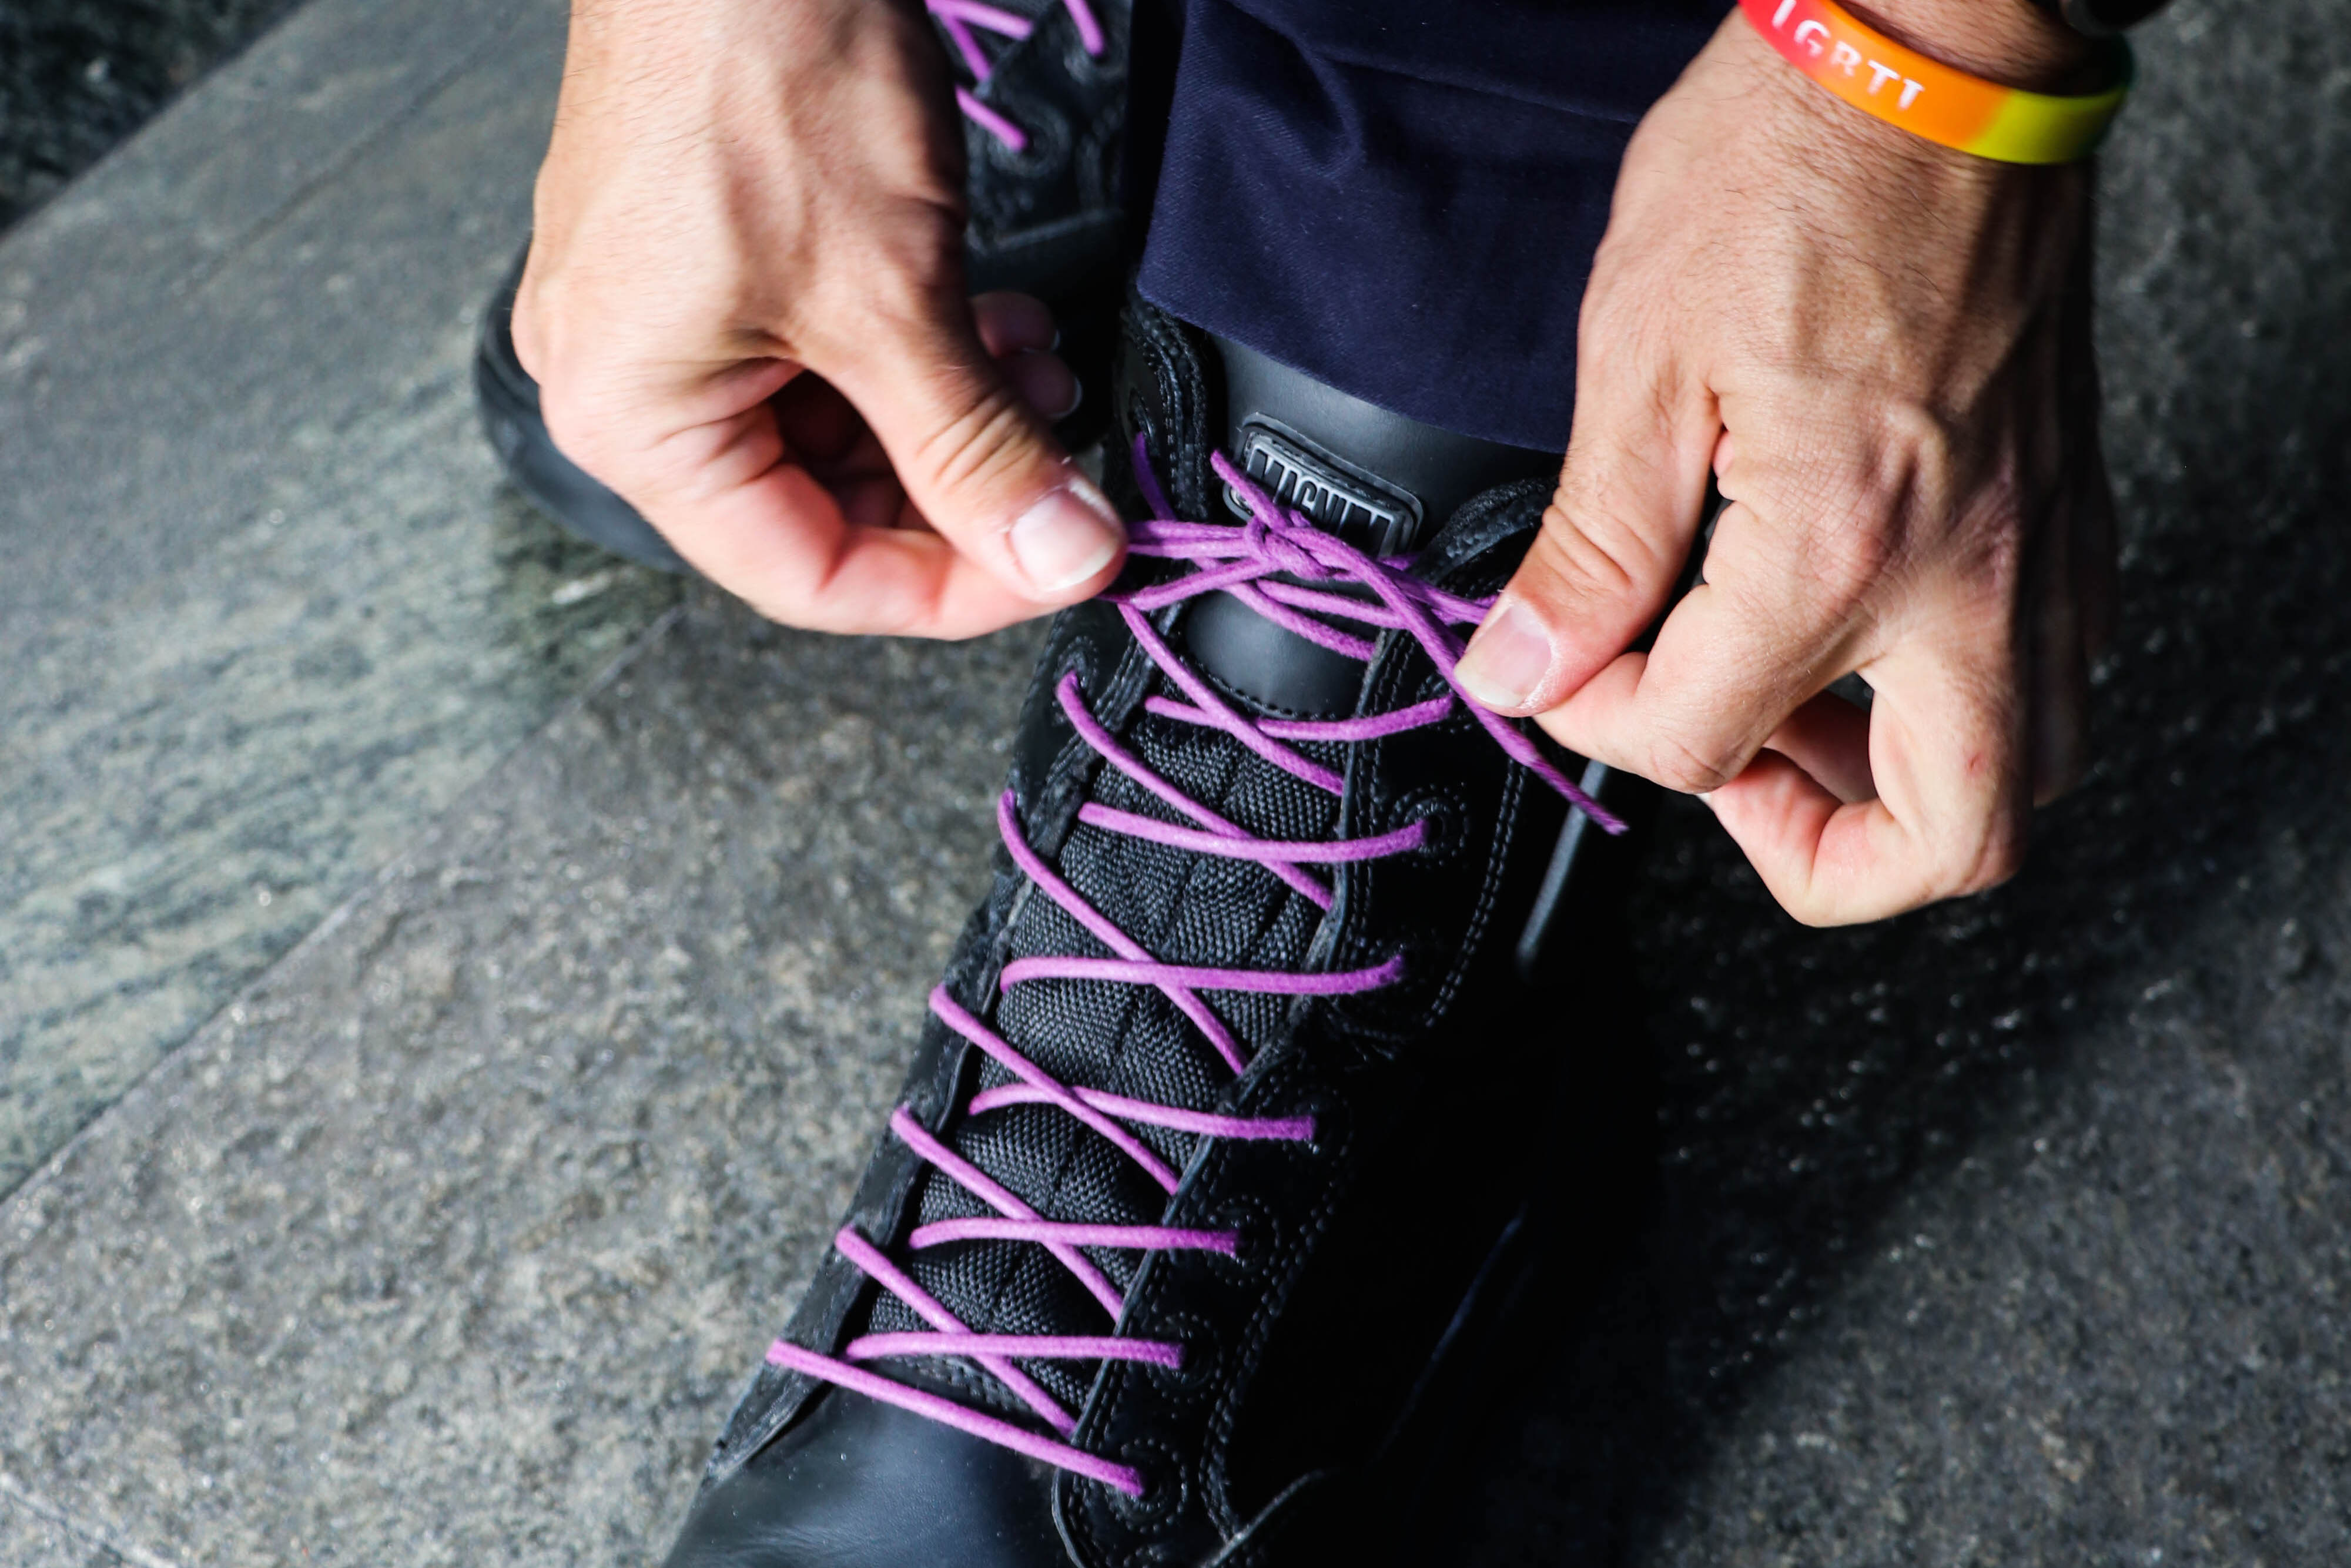 Queensland Police lace up to support LGBTI youth on Wear It Purple Day